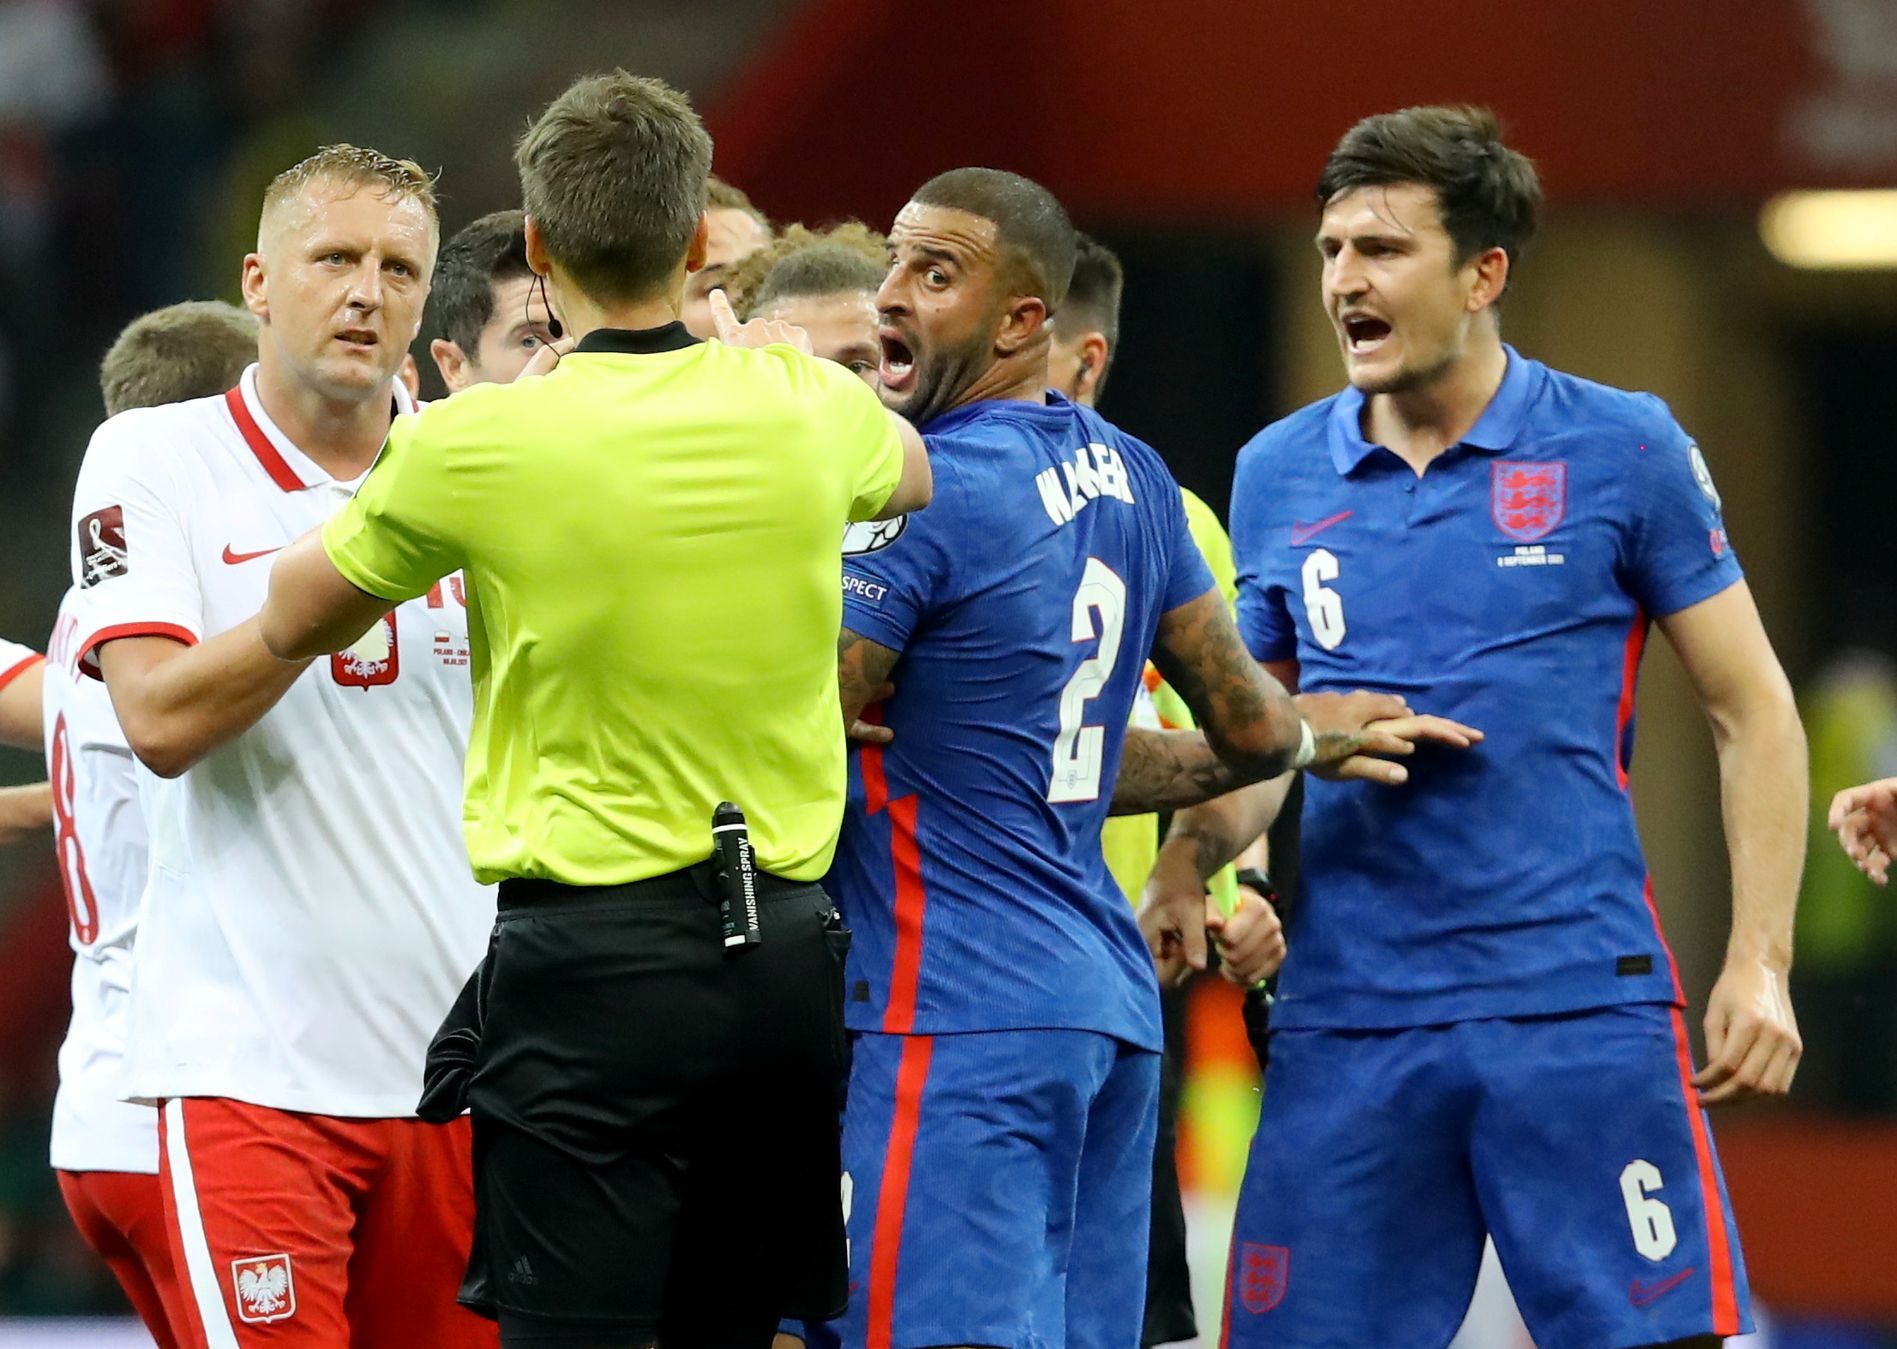 Lack of evidence.  Poles will not receive sanctions after Glik-Walker fight, despite complaint from England